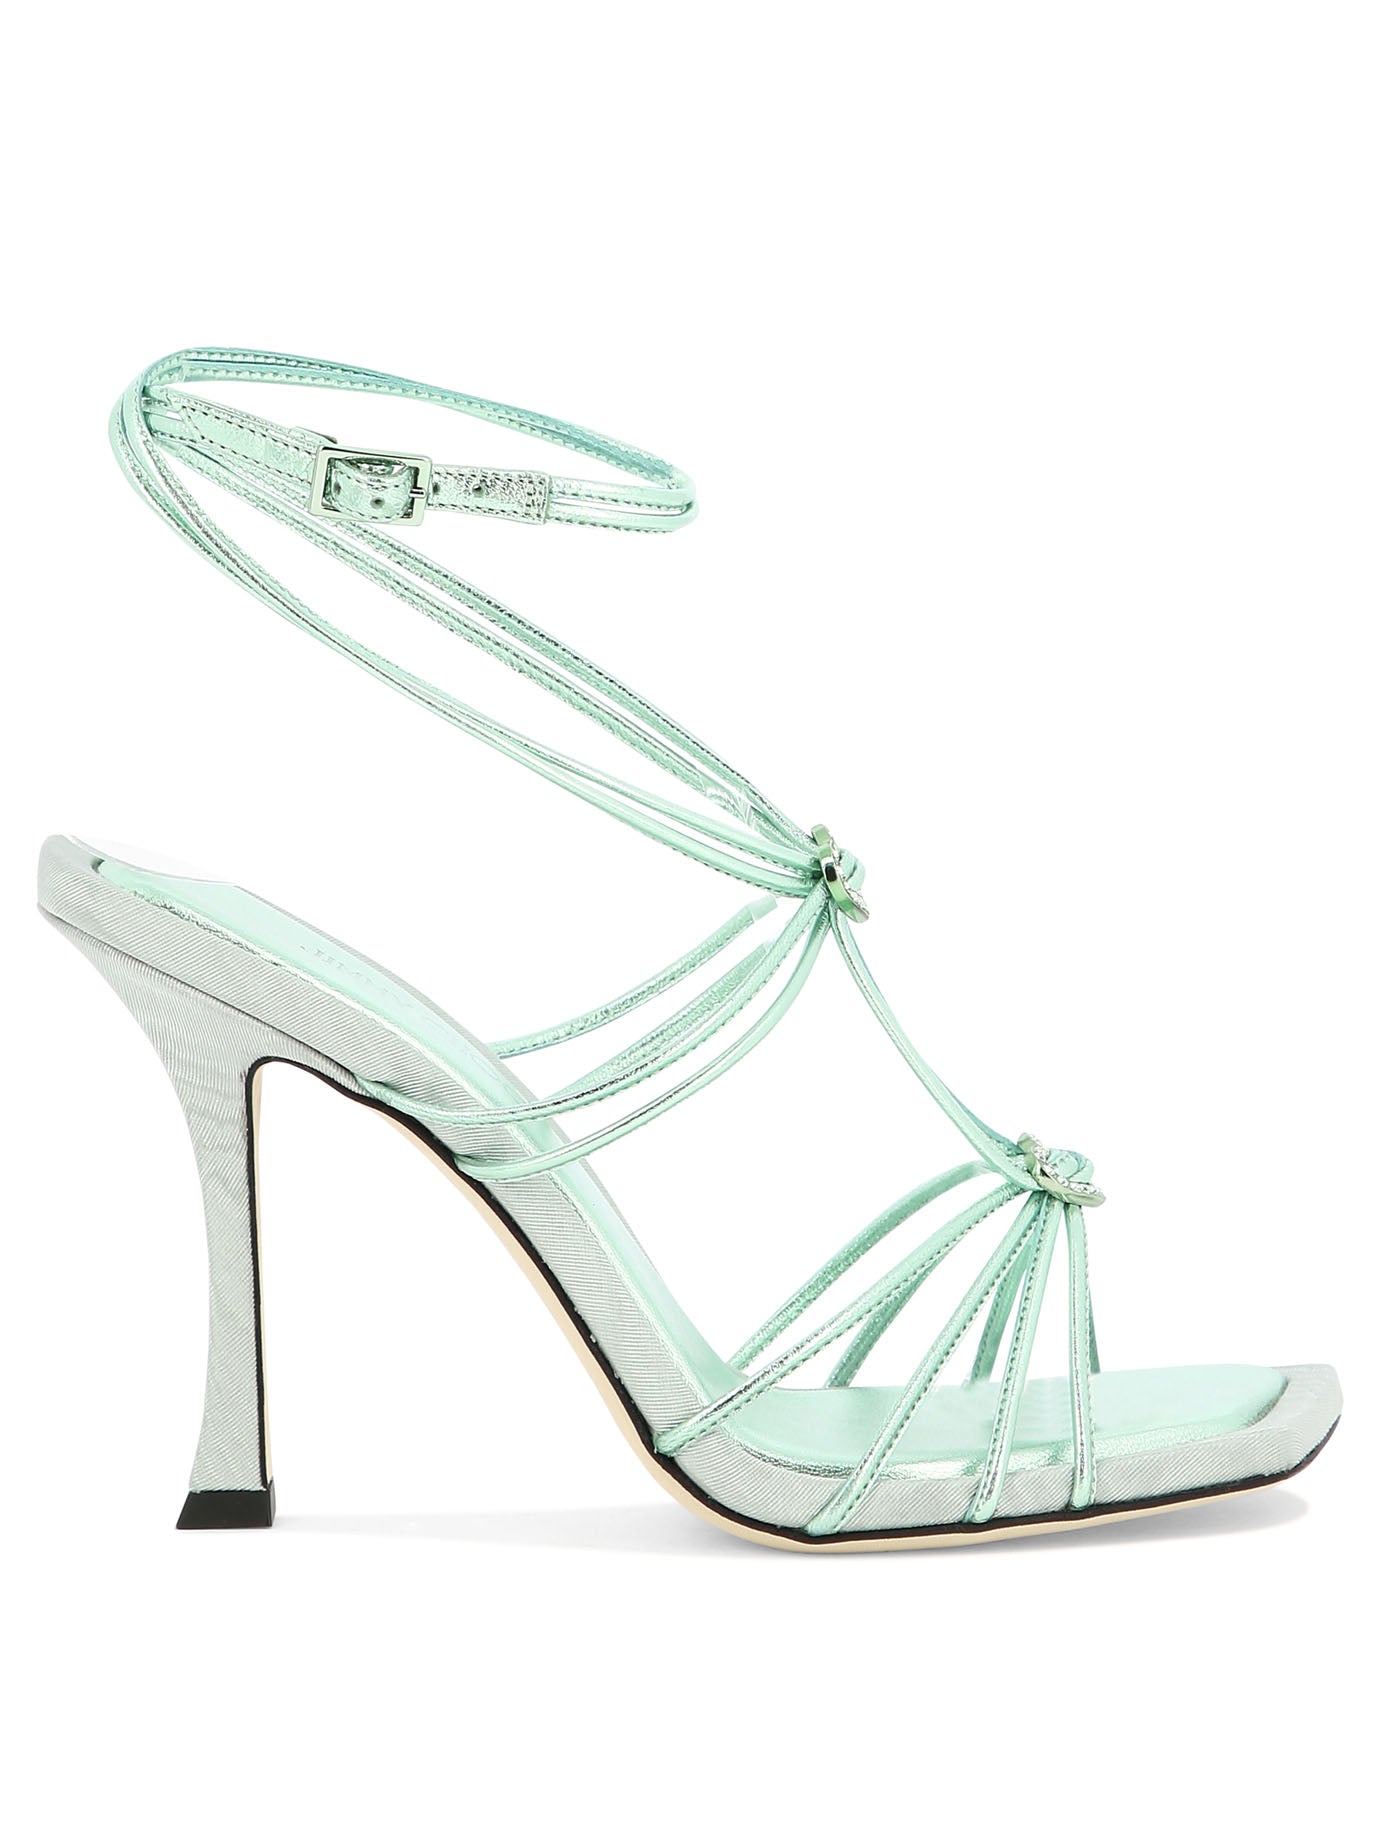 strappy sandals – Lizzy's Latest